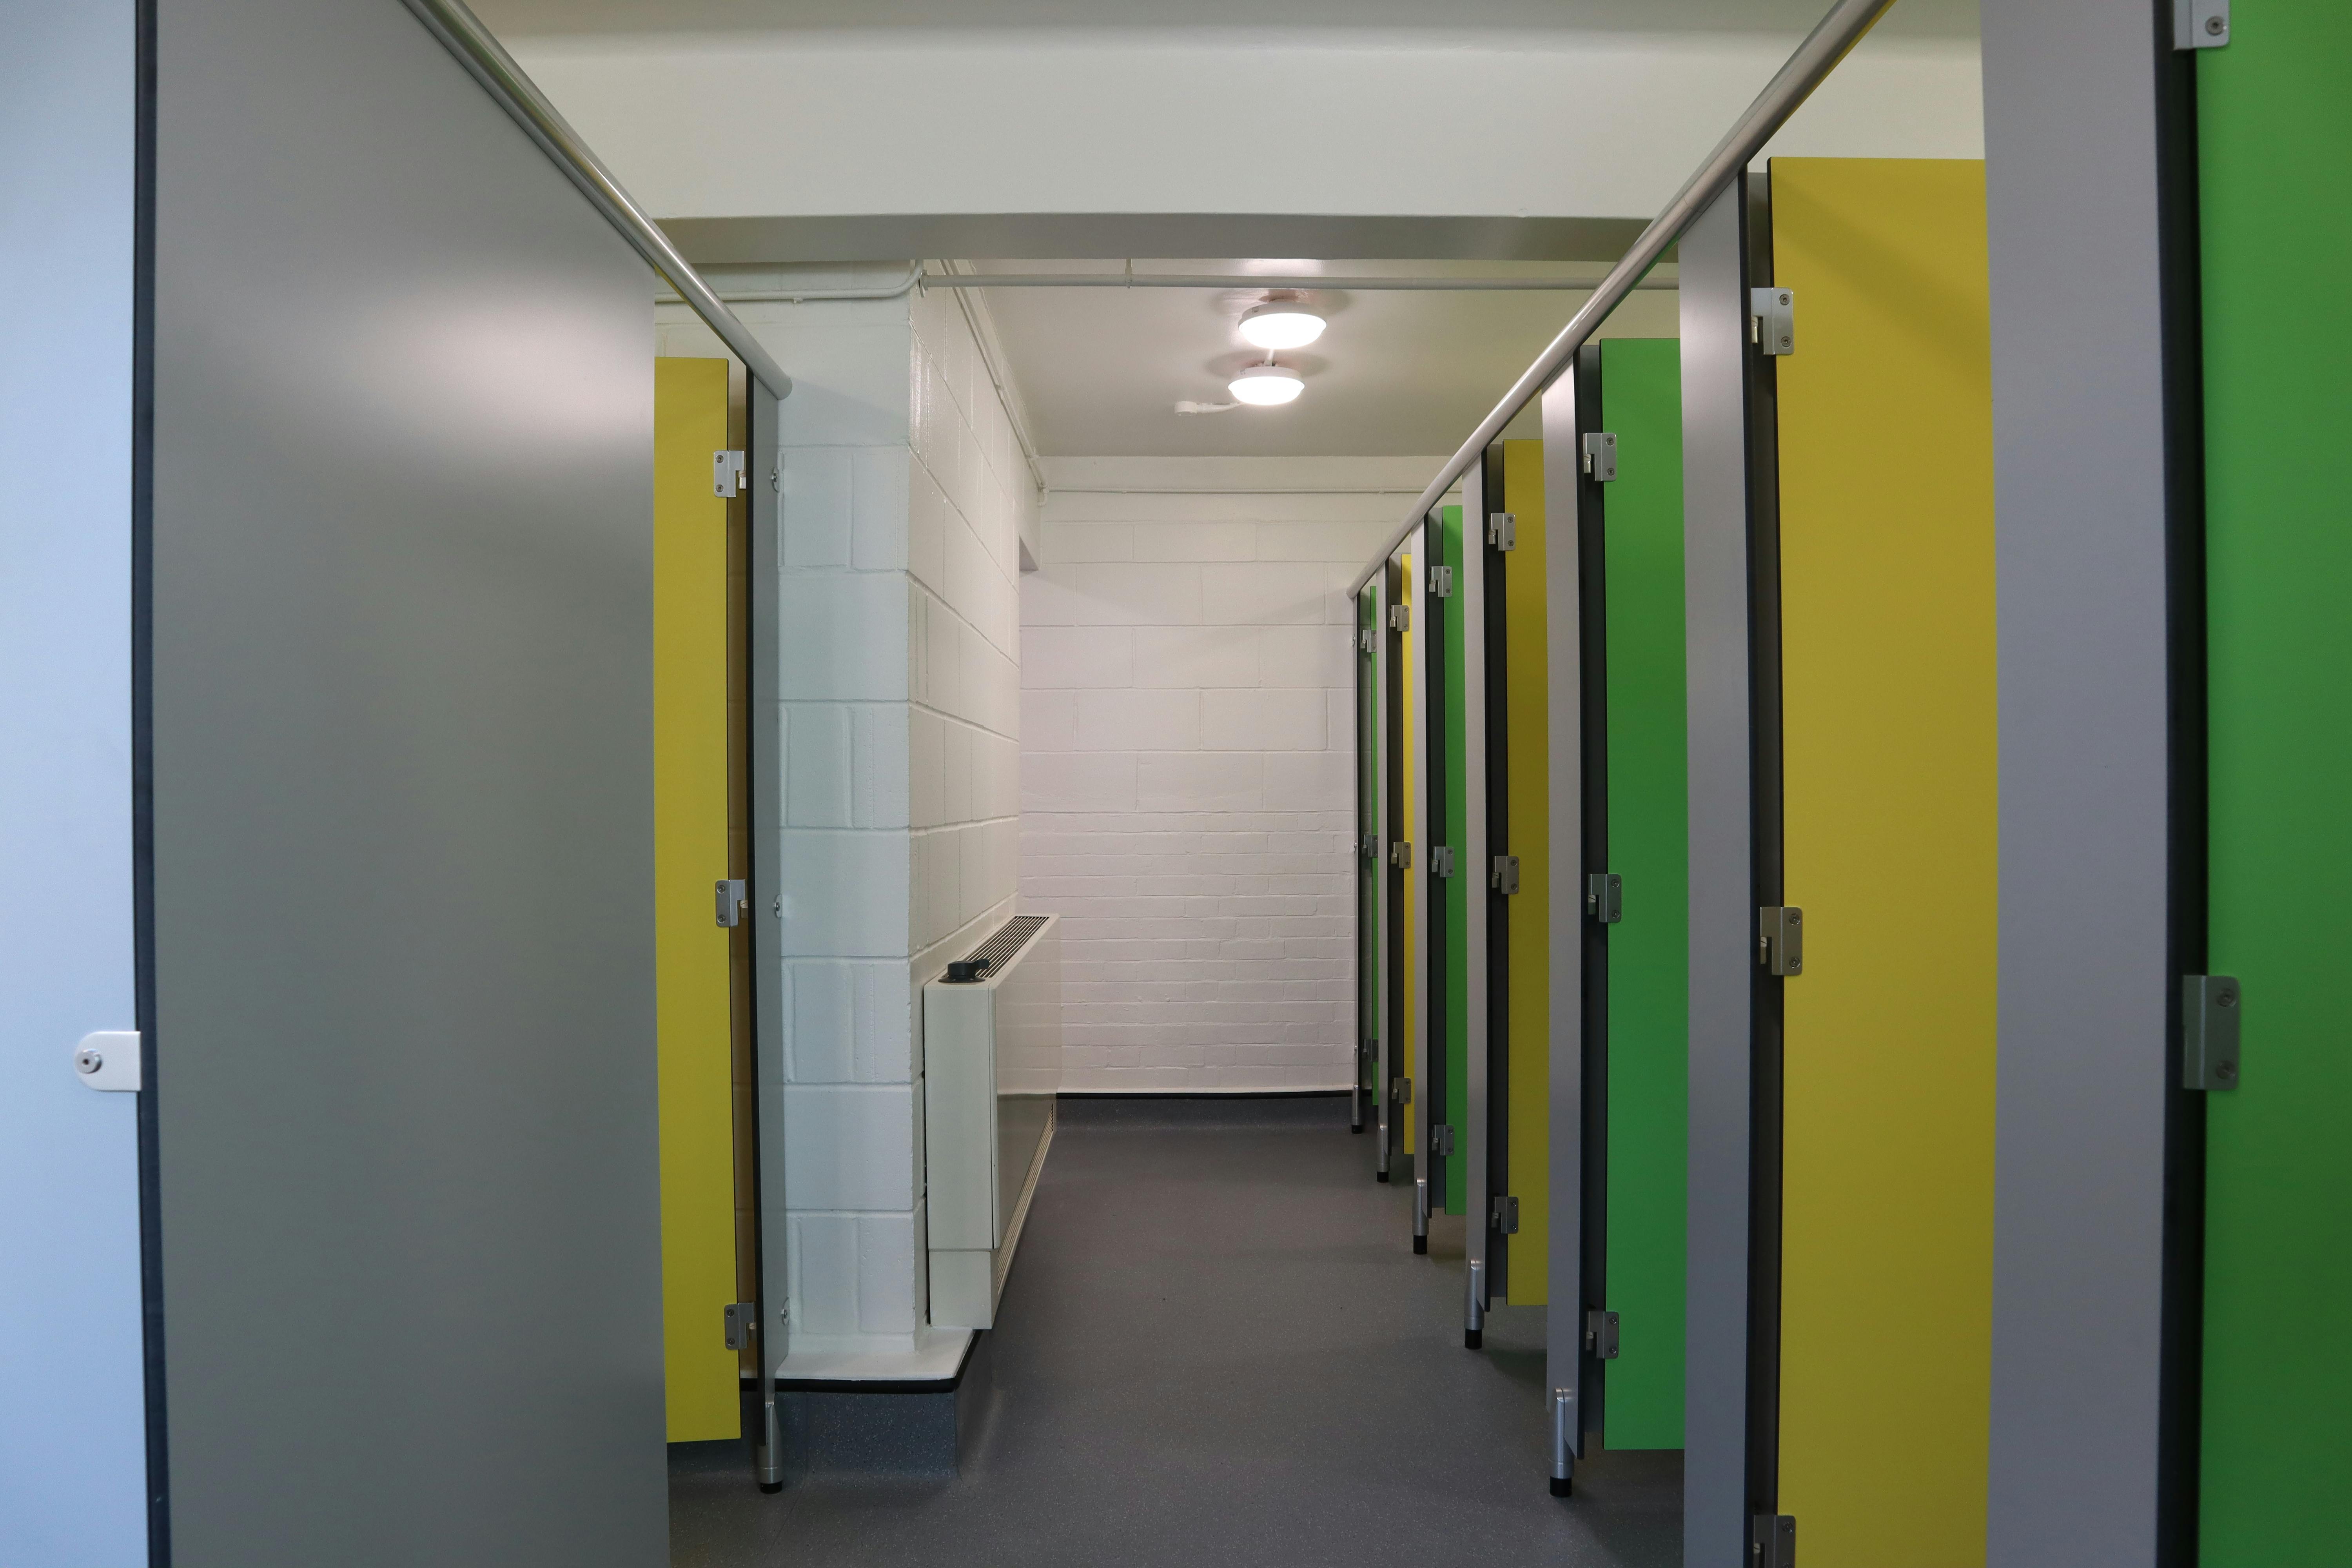 Are your Students avoiding the Toilets?